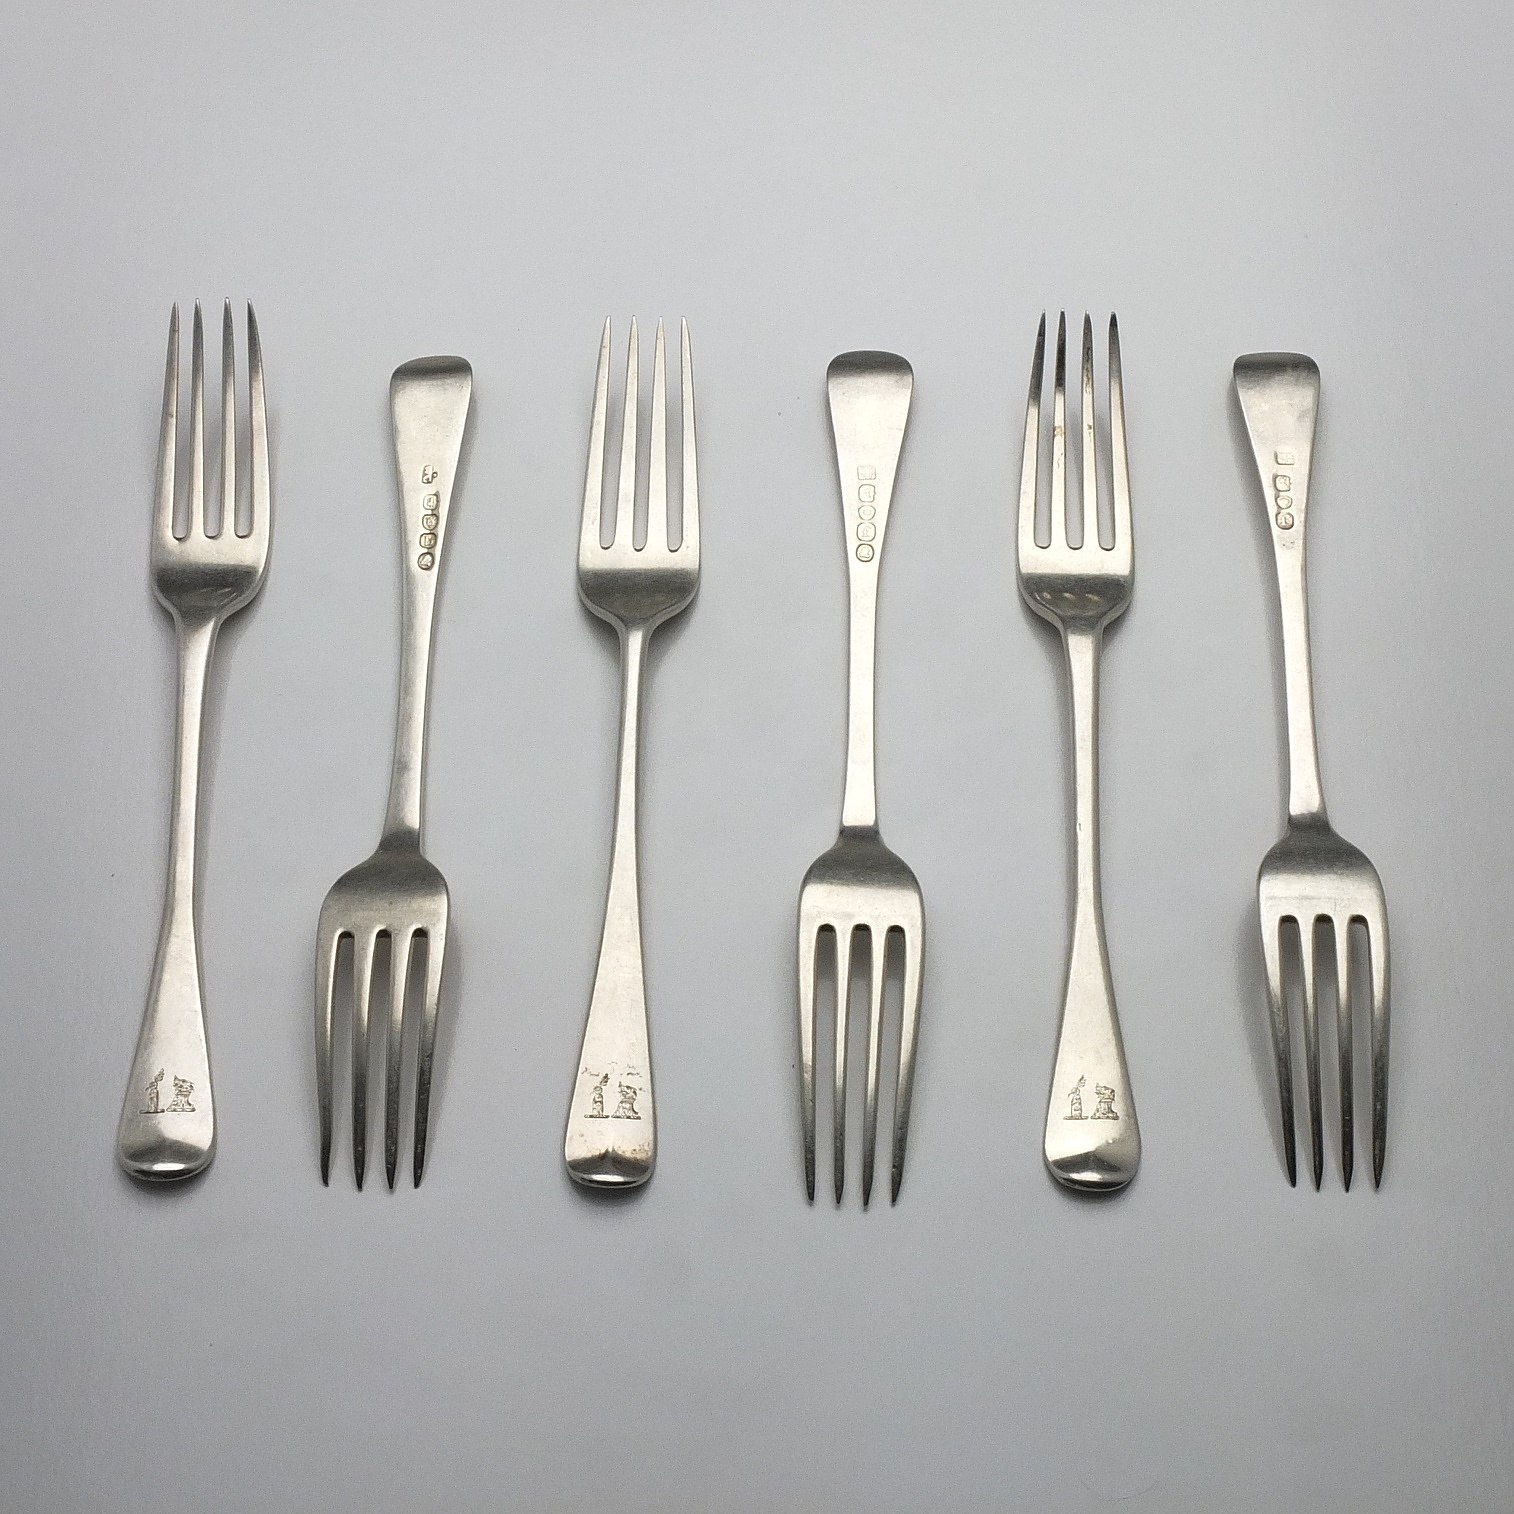 'Six Georgian Crested Sterling Silver Entree Forks Including Four William Eley & William Fearn London 1821'